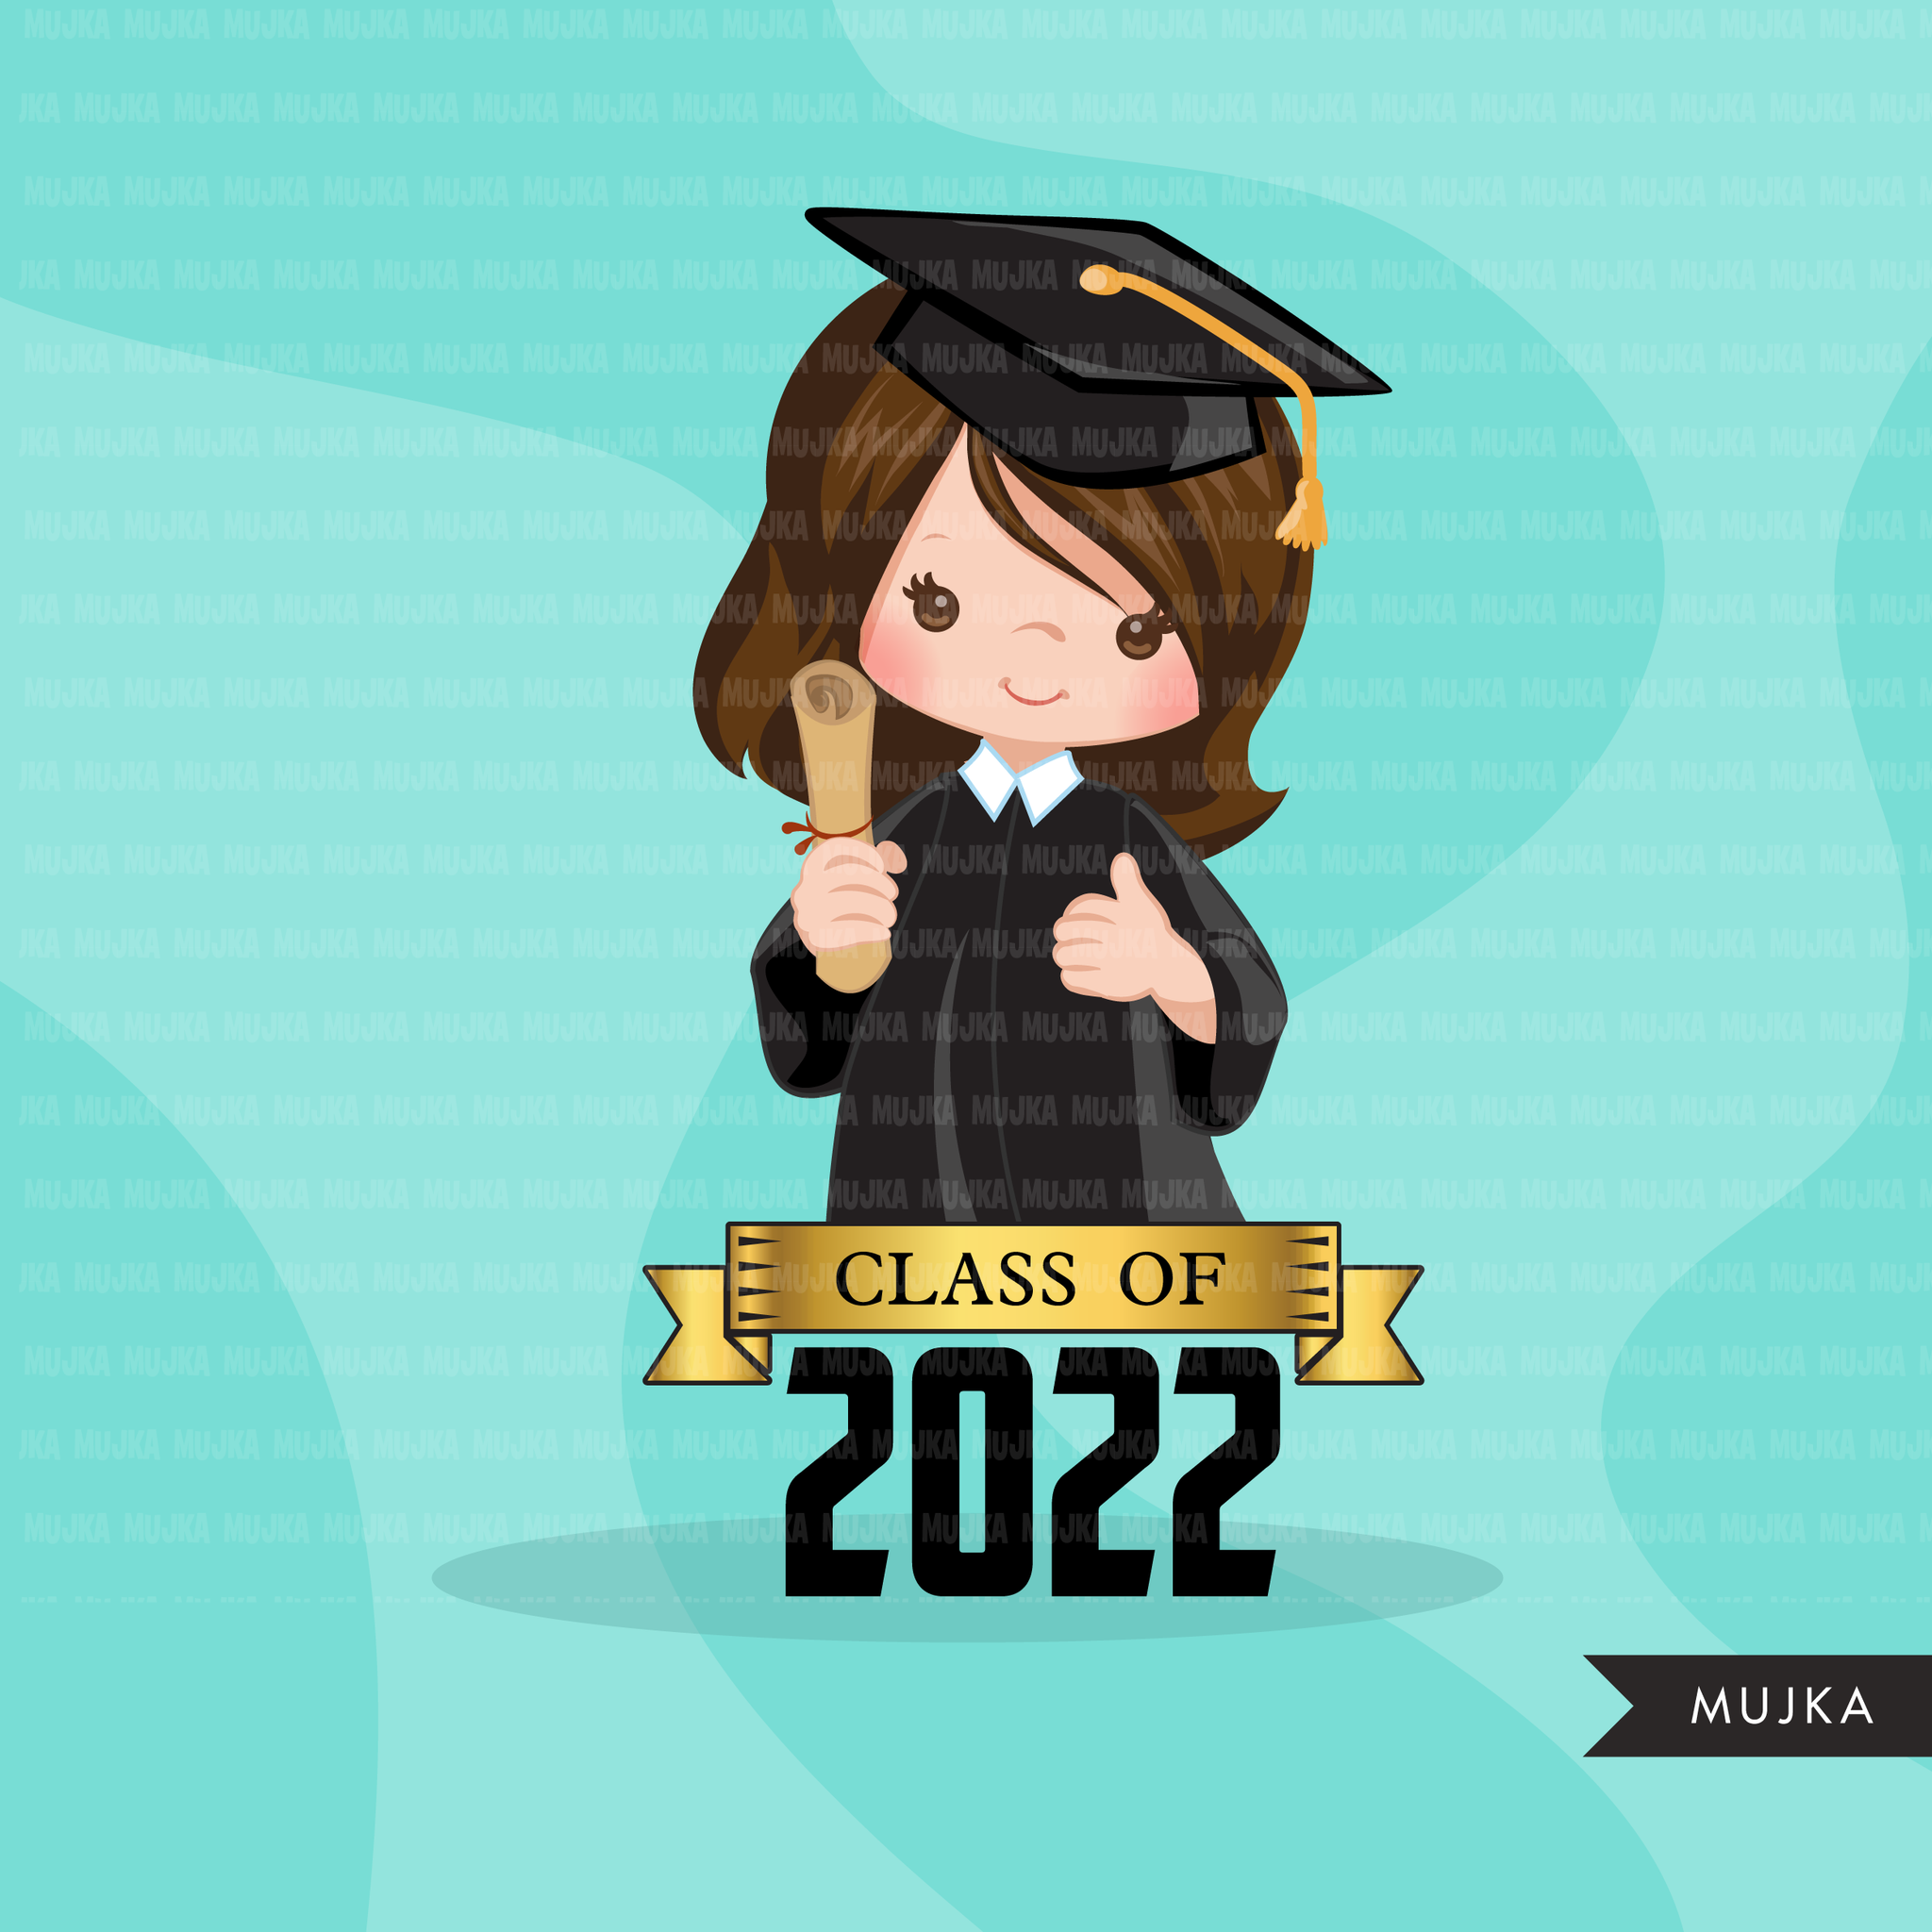 Graduation Clipart, 2022 cute graduate girls with cape and scroll, school, student class of 2022 gold banner graphics, PNG clip art